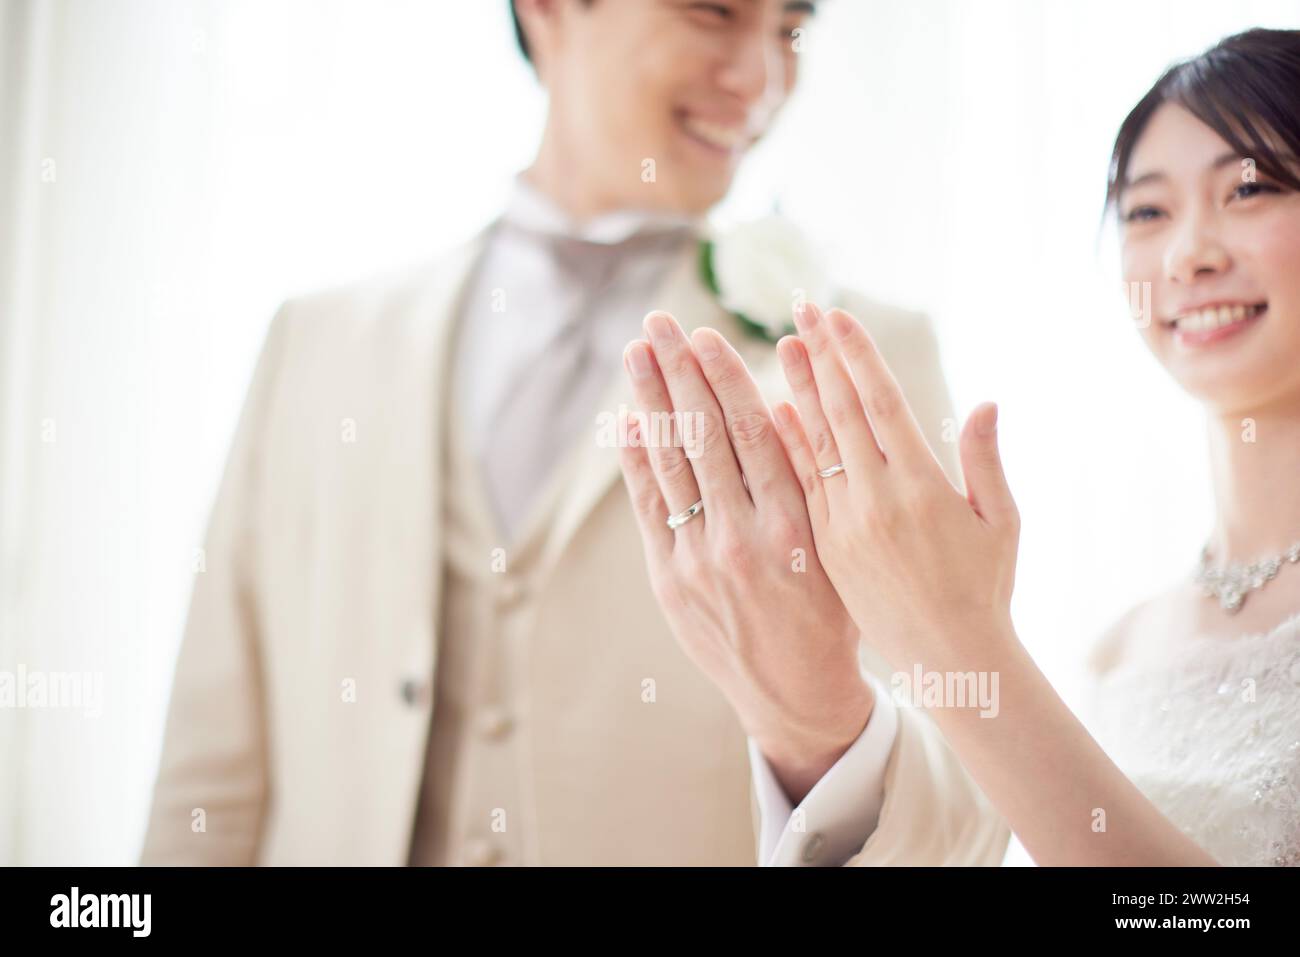 Bride and groom showing rings Stock Photo